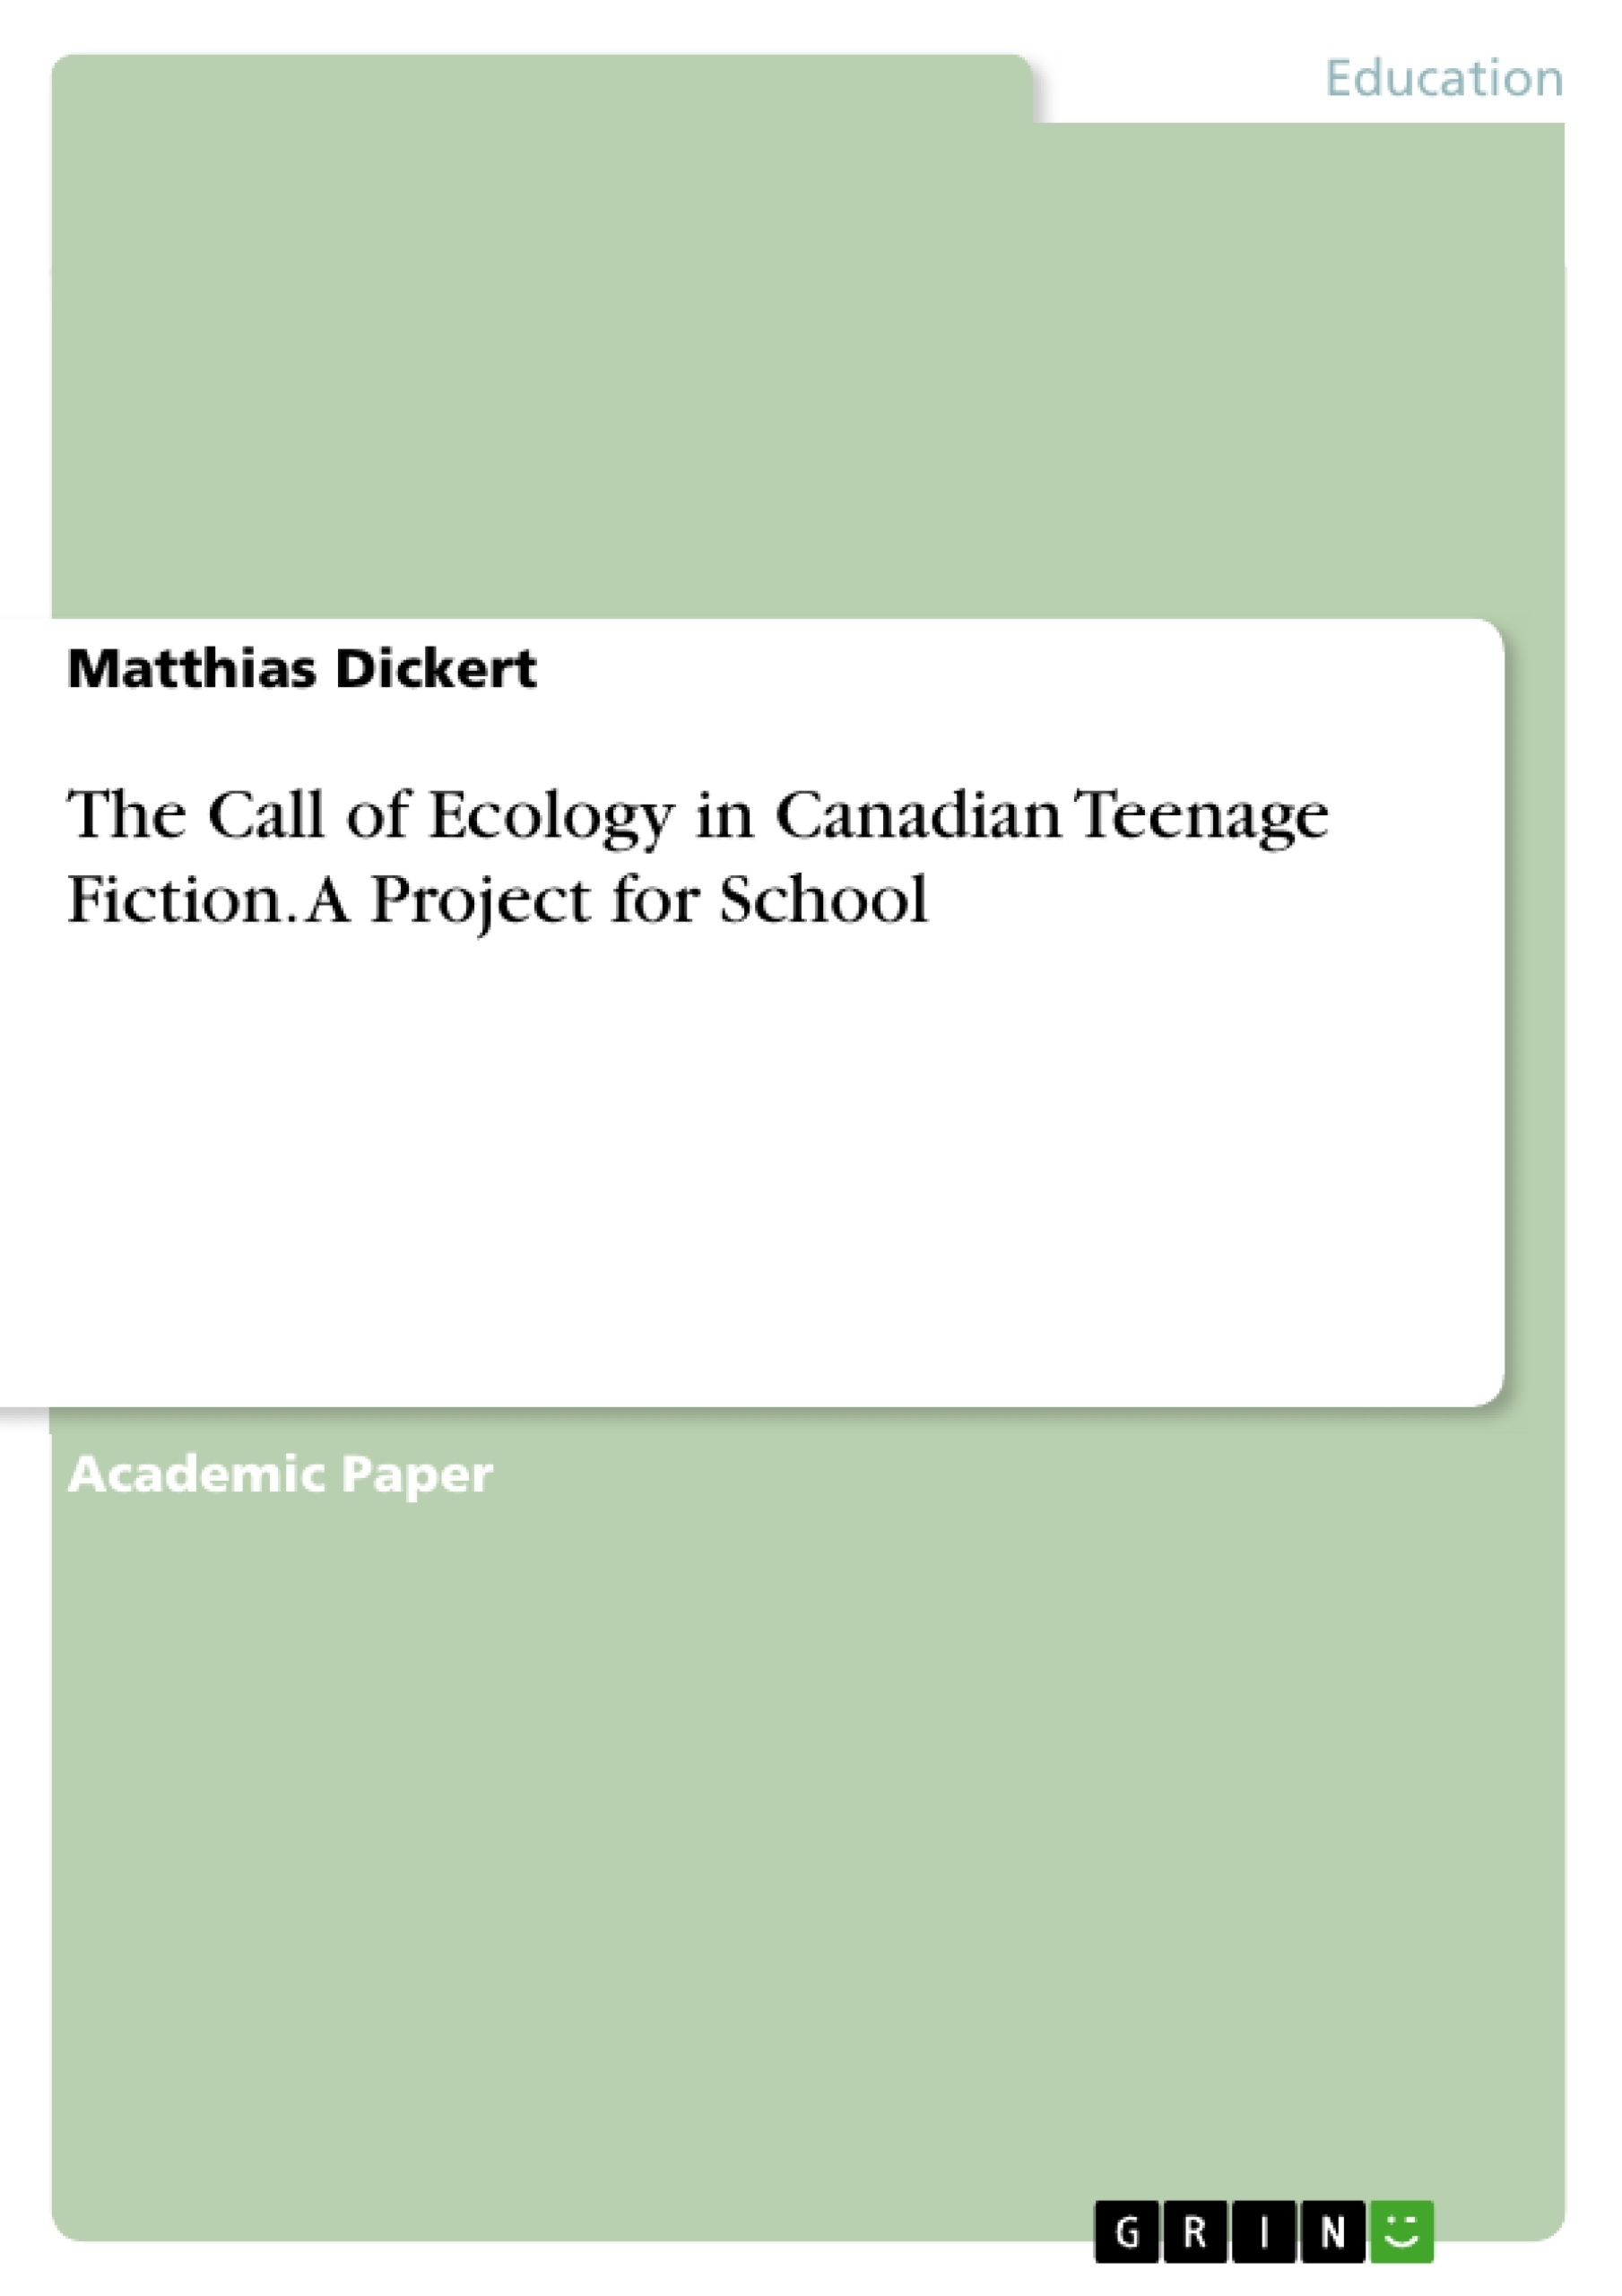 Title: The Call of Ecology in Canadian Teenage Fiction. A Project for School